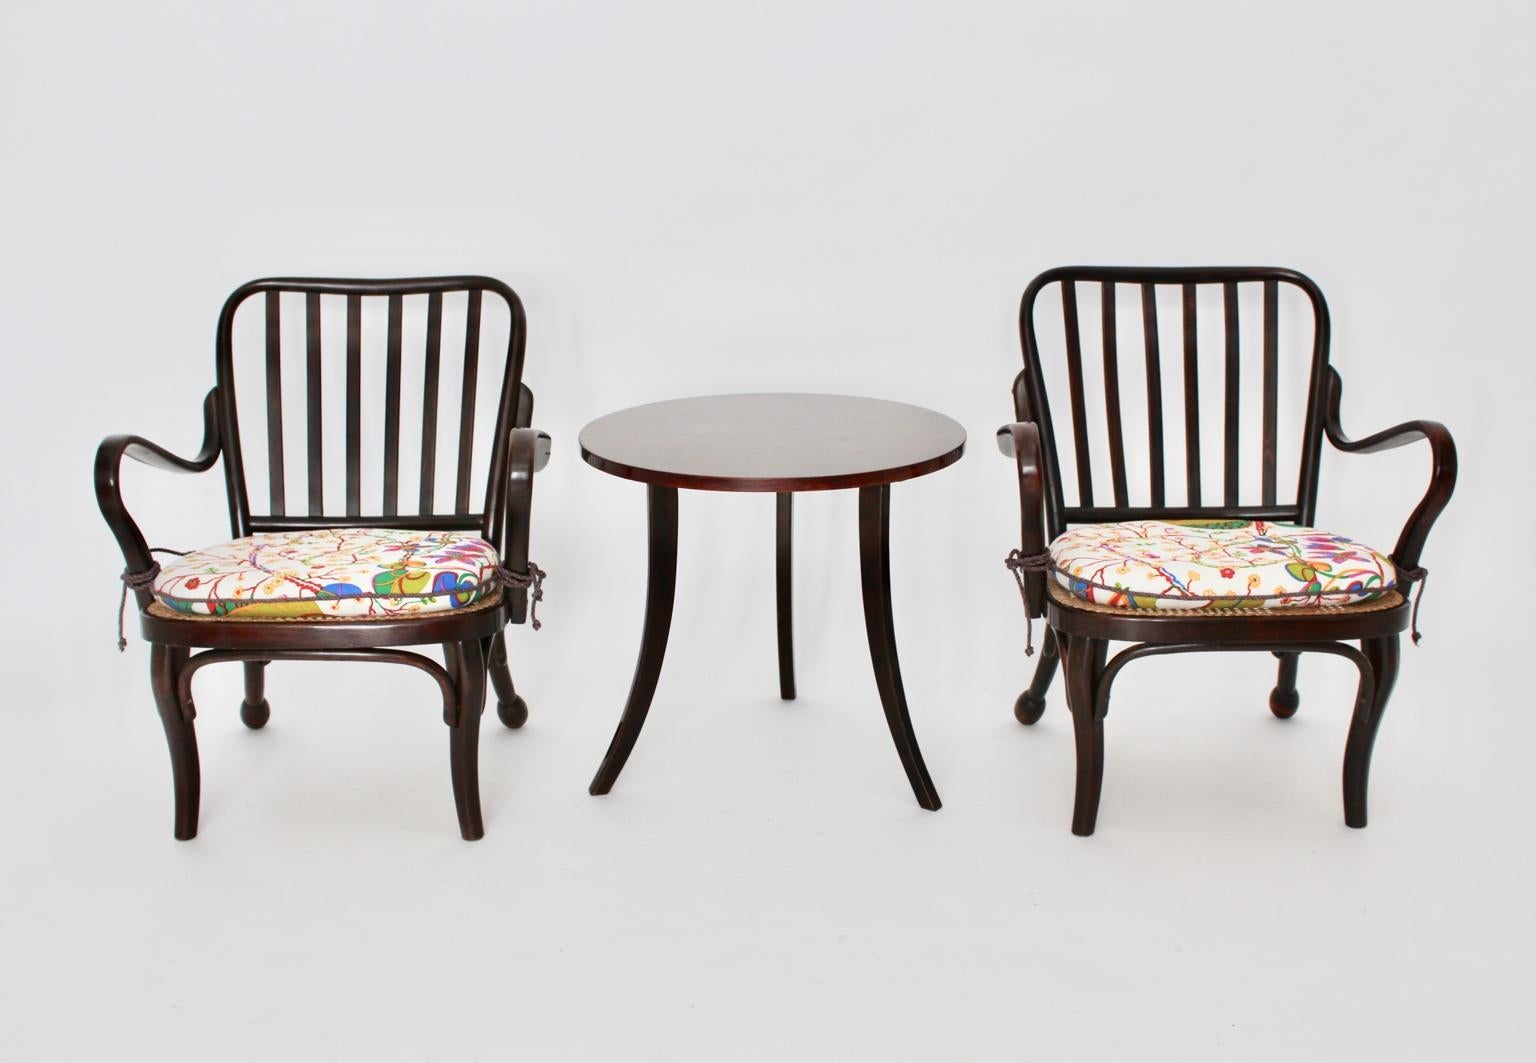 Art Deco Vintage Wood Armchairs and Coffee Table by Josef Frank Vienna circa 1930.
We present a stunning ensemble of two armchairs and one coffee table by Josef Frank, Vienna circa 1930.
Here are the details to the armchairs:
Pair of armchairs by